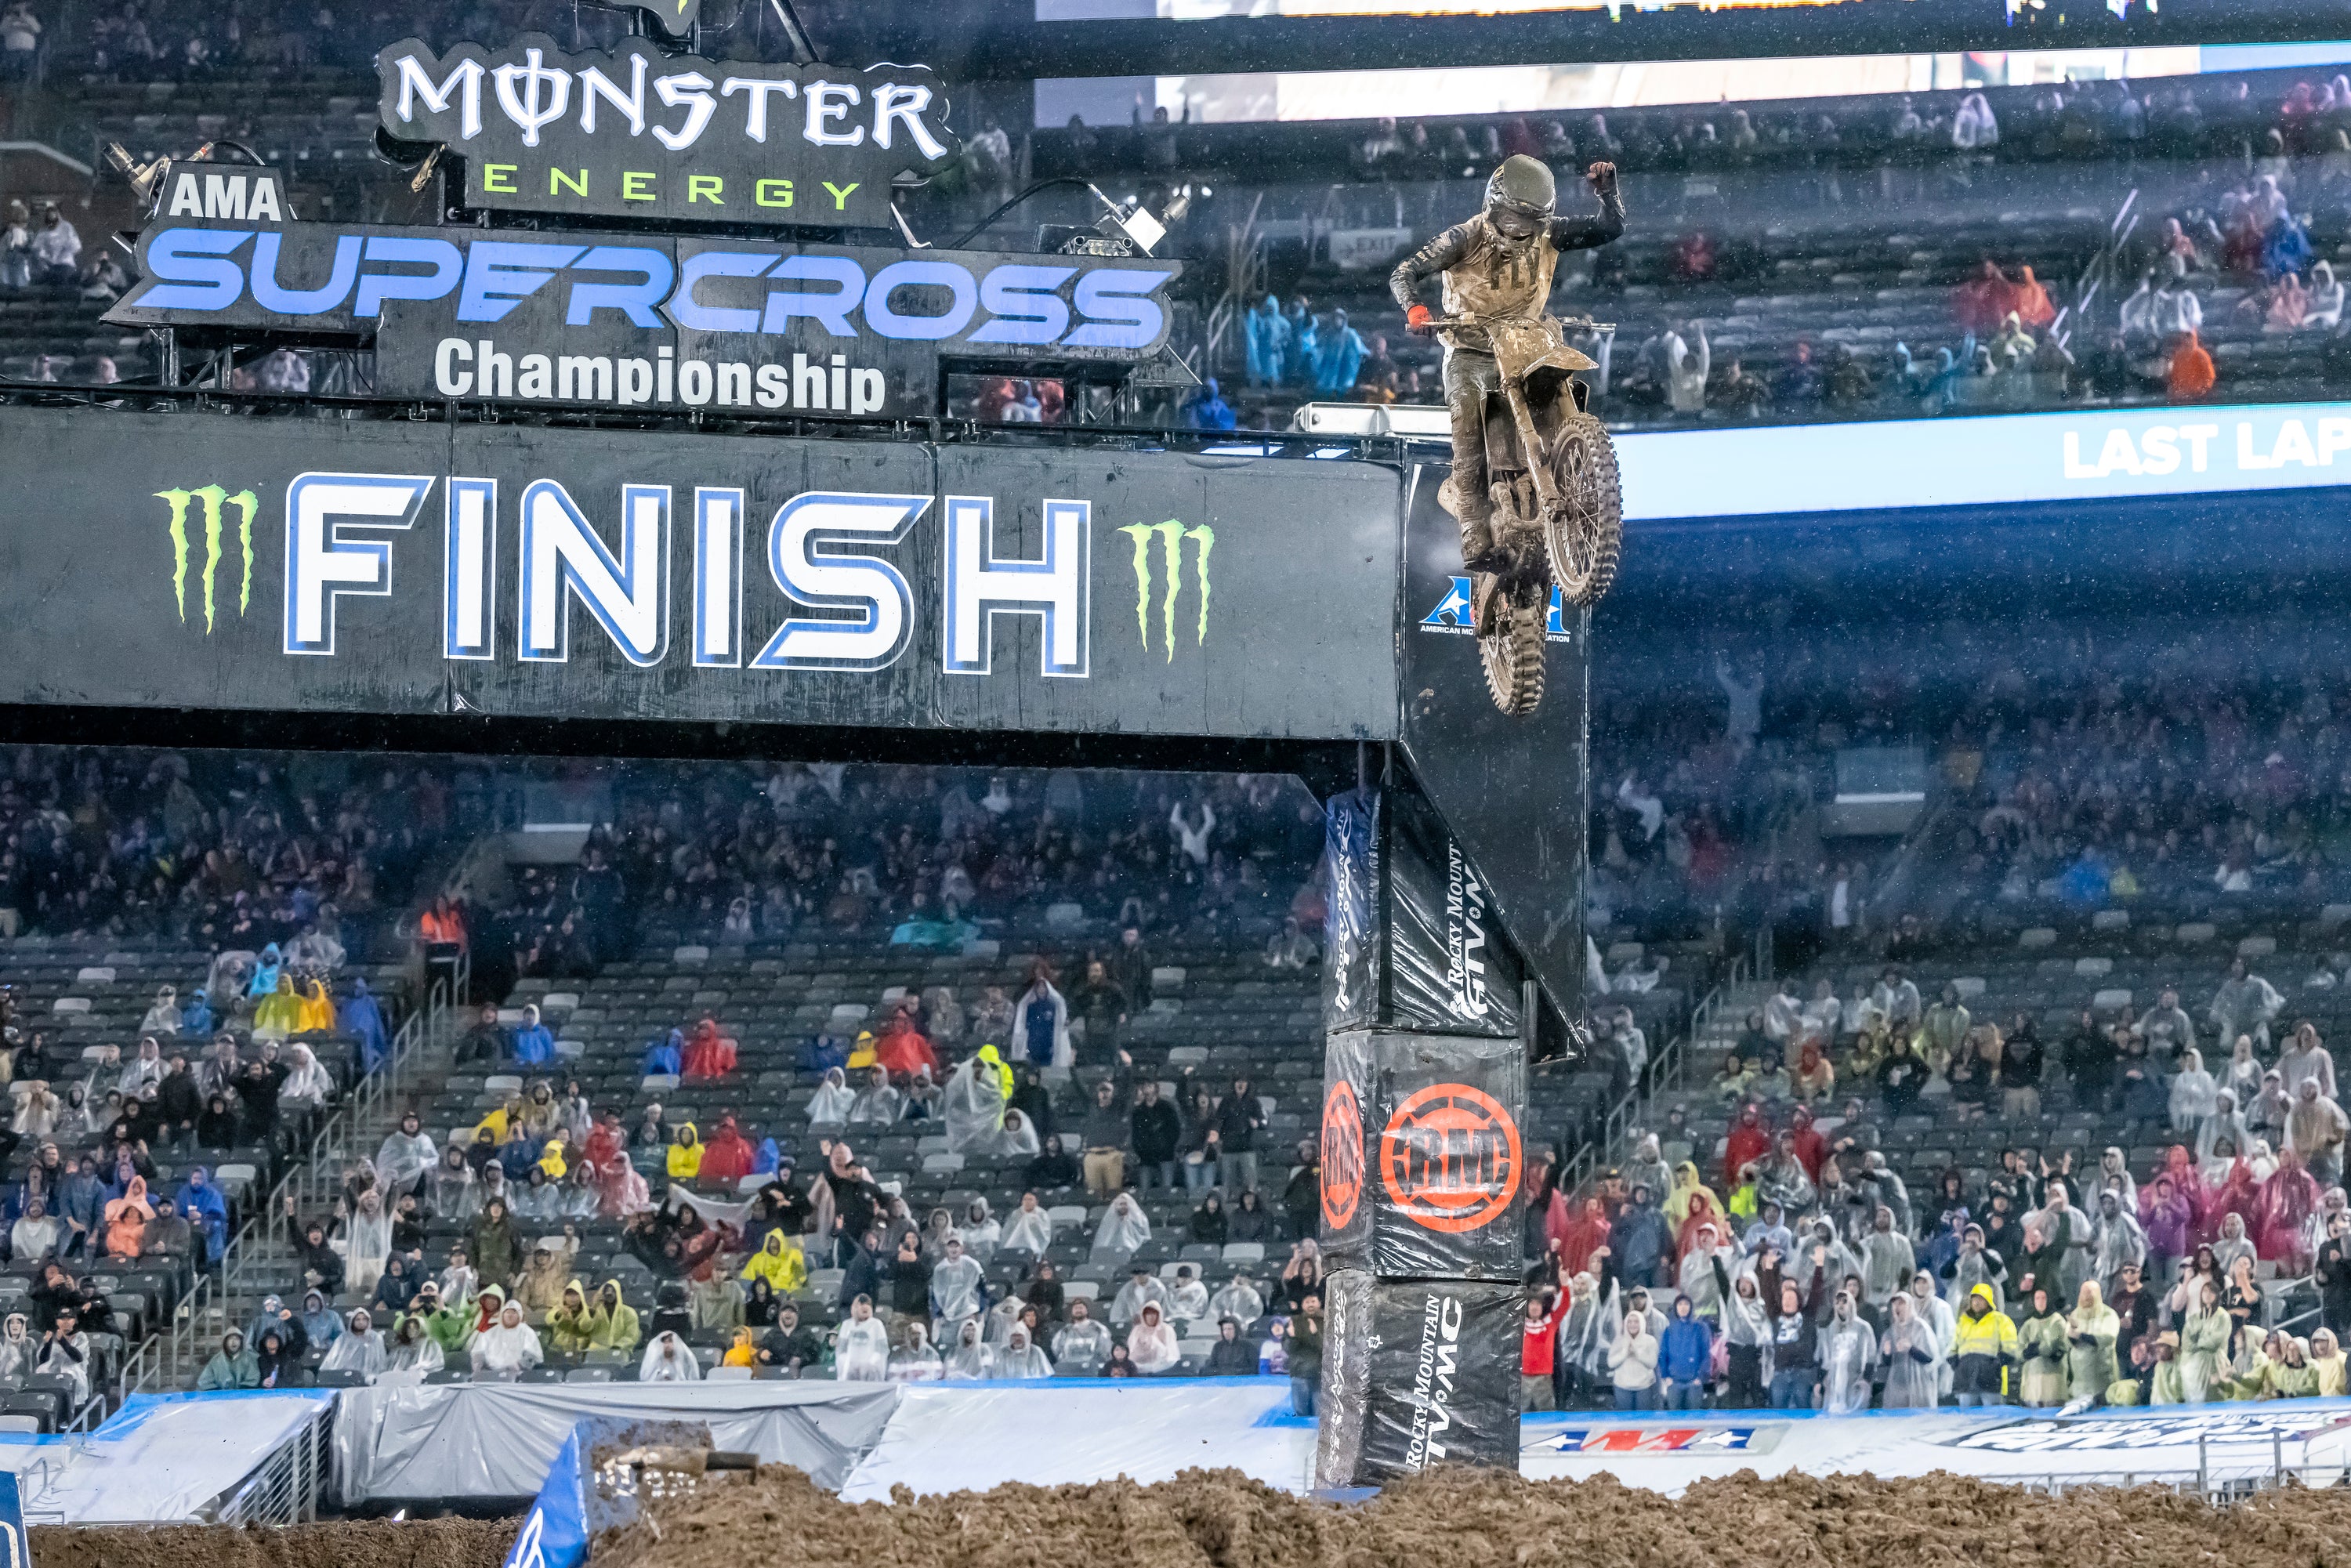 ALPINESTARS PODIUM LOCK-OUT AS MAX ANSTIE WINS RAIN-DELAYED 250SX EAST/WEST SHOWDOWN AT EAST RUTHERFORD